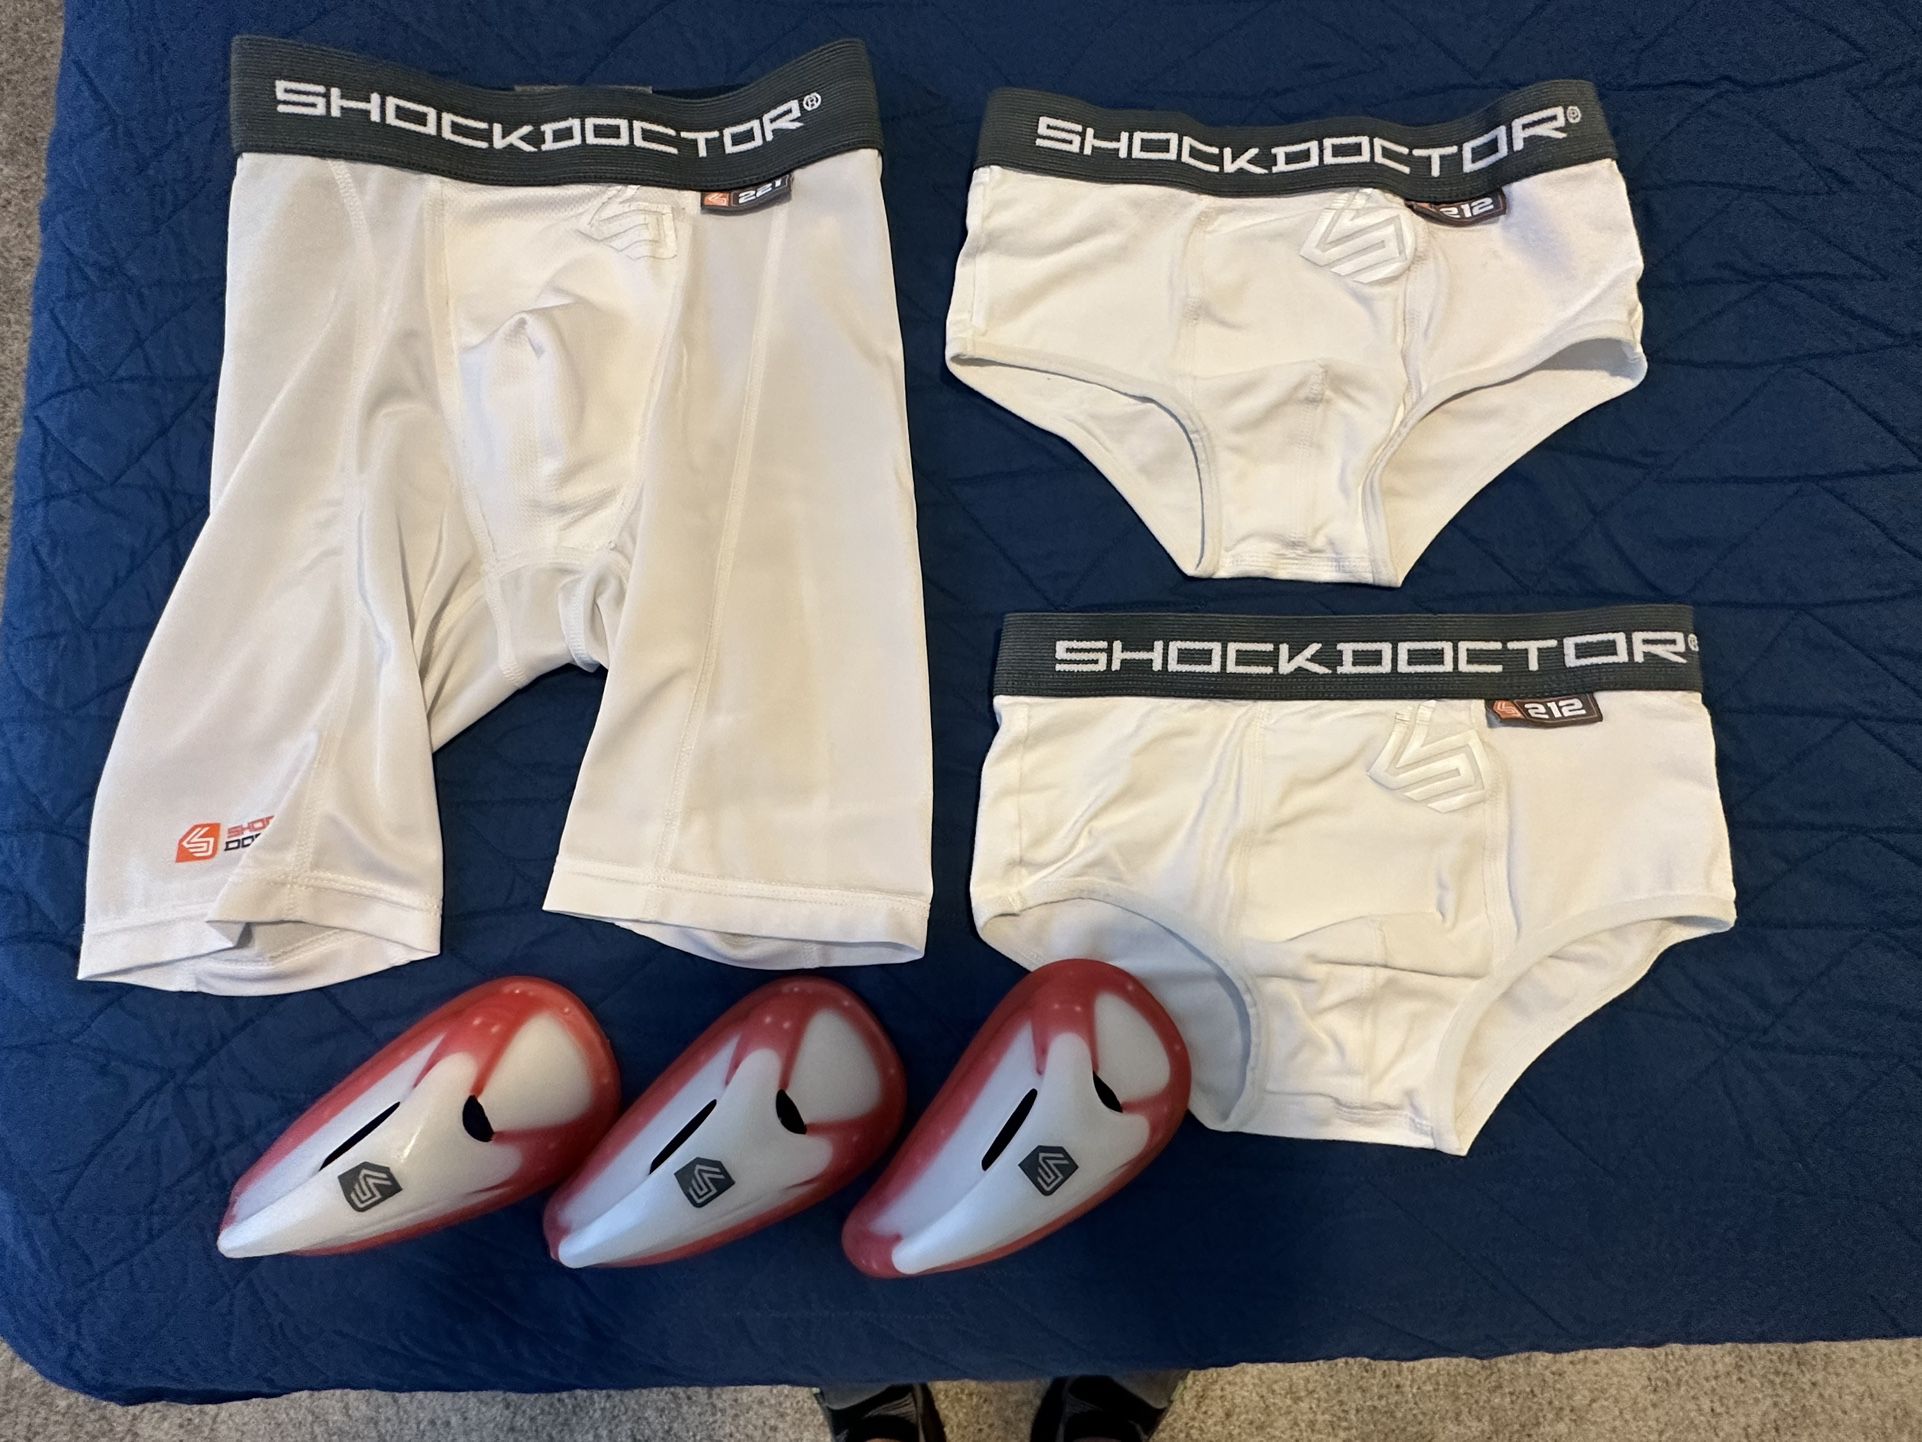 ShockDoctor - Youth Boys Protective Cup for Sale in Austin, TX